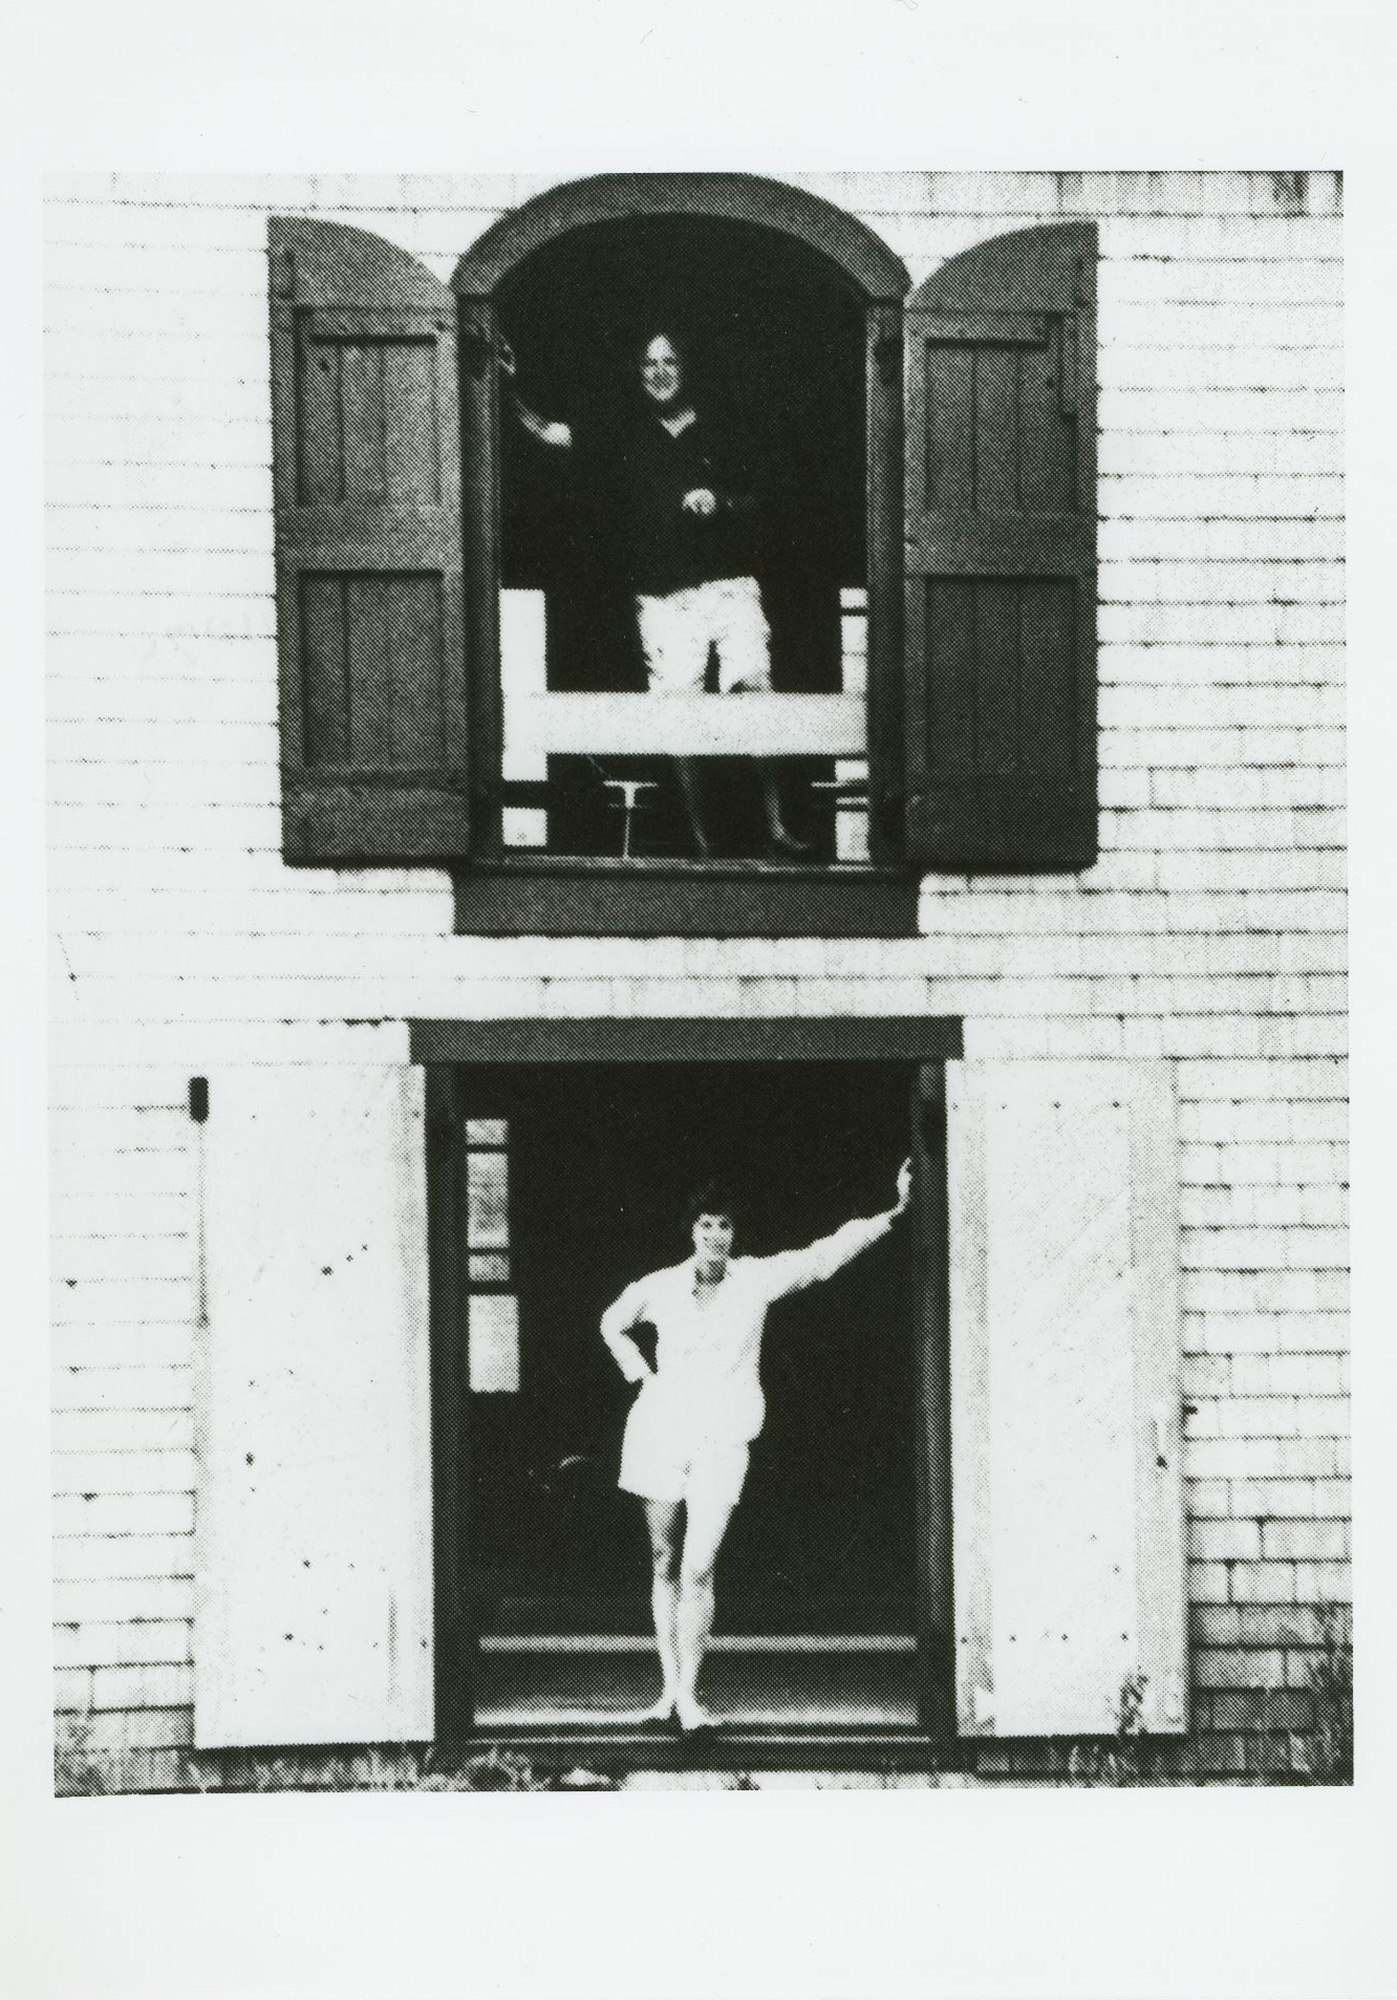 Motherwell and Helen Frankenthaler in large windows stacked on two stories of a large open building